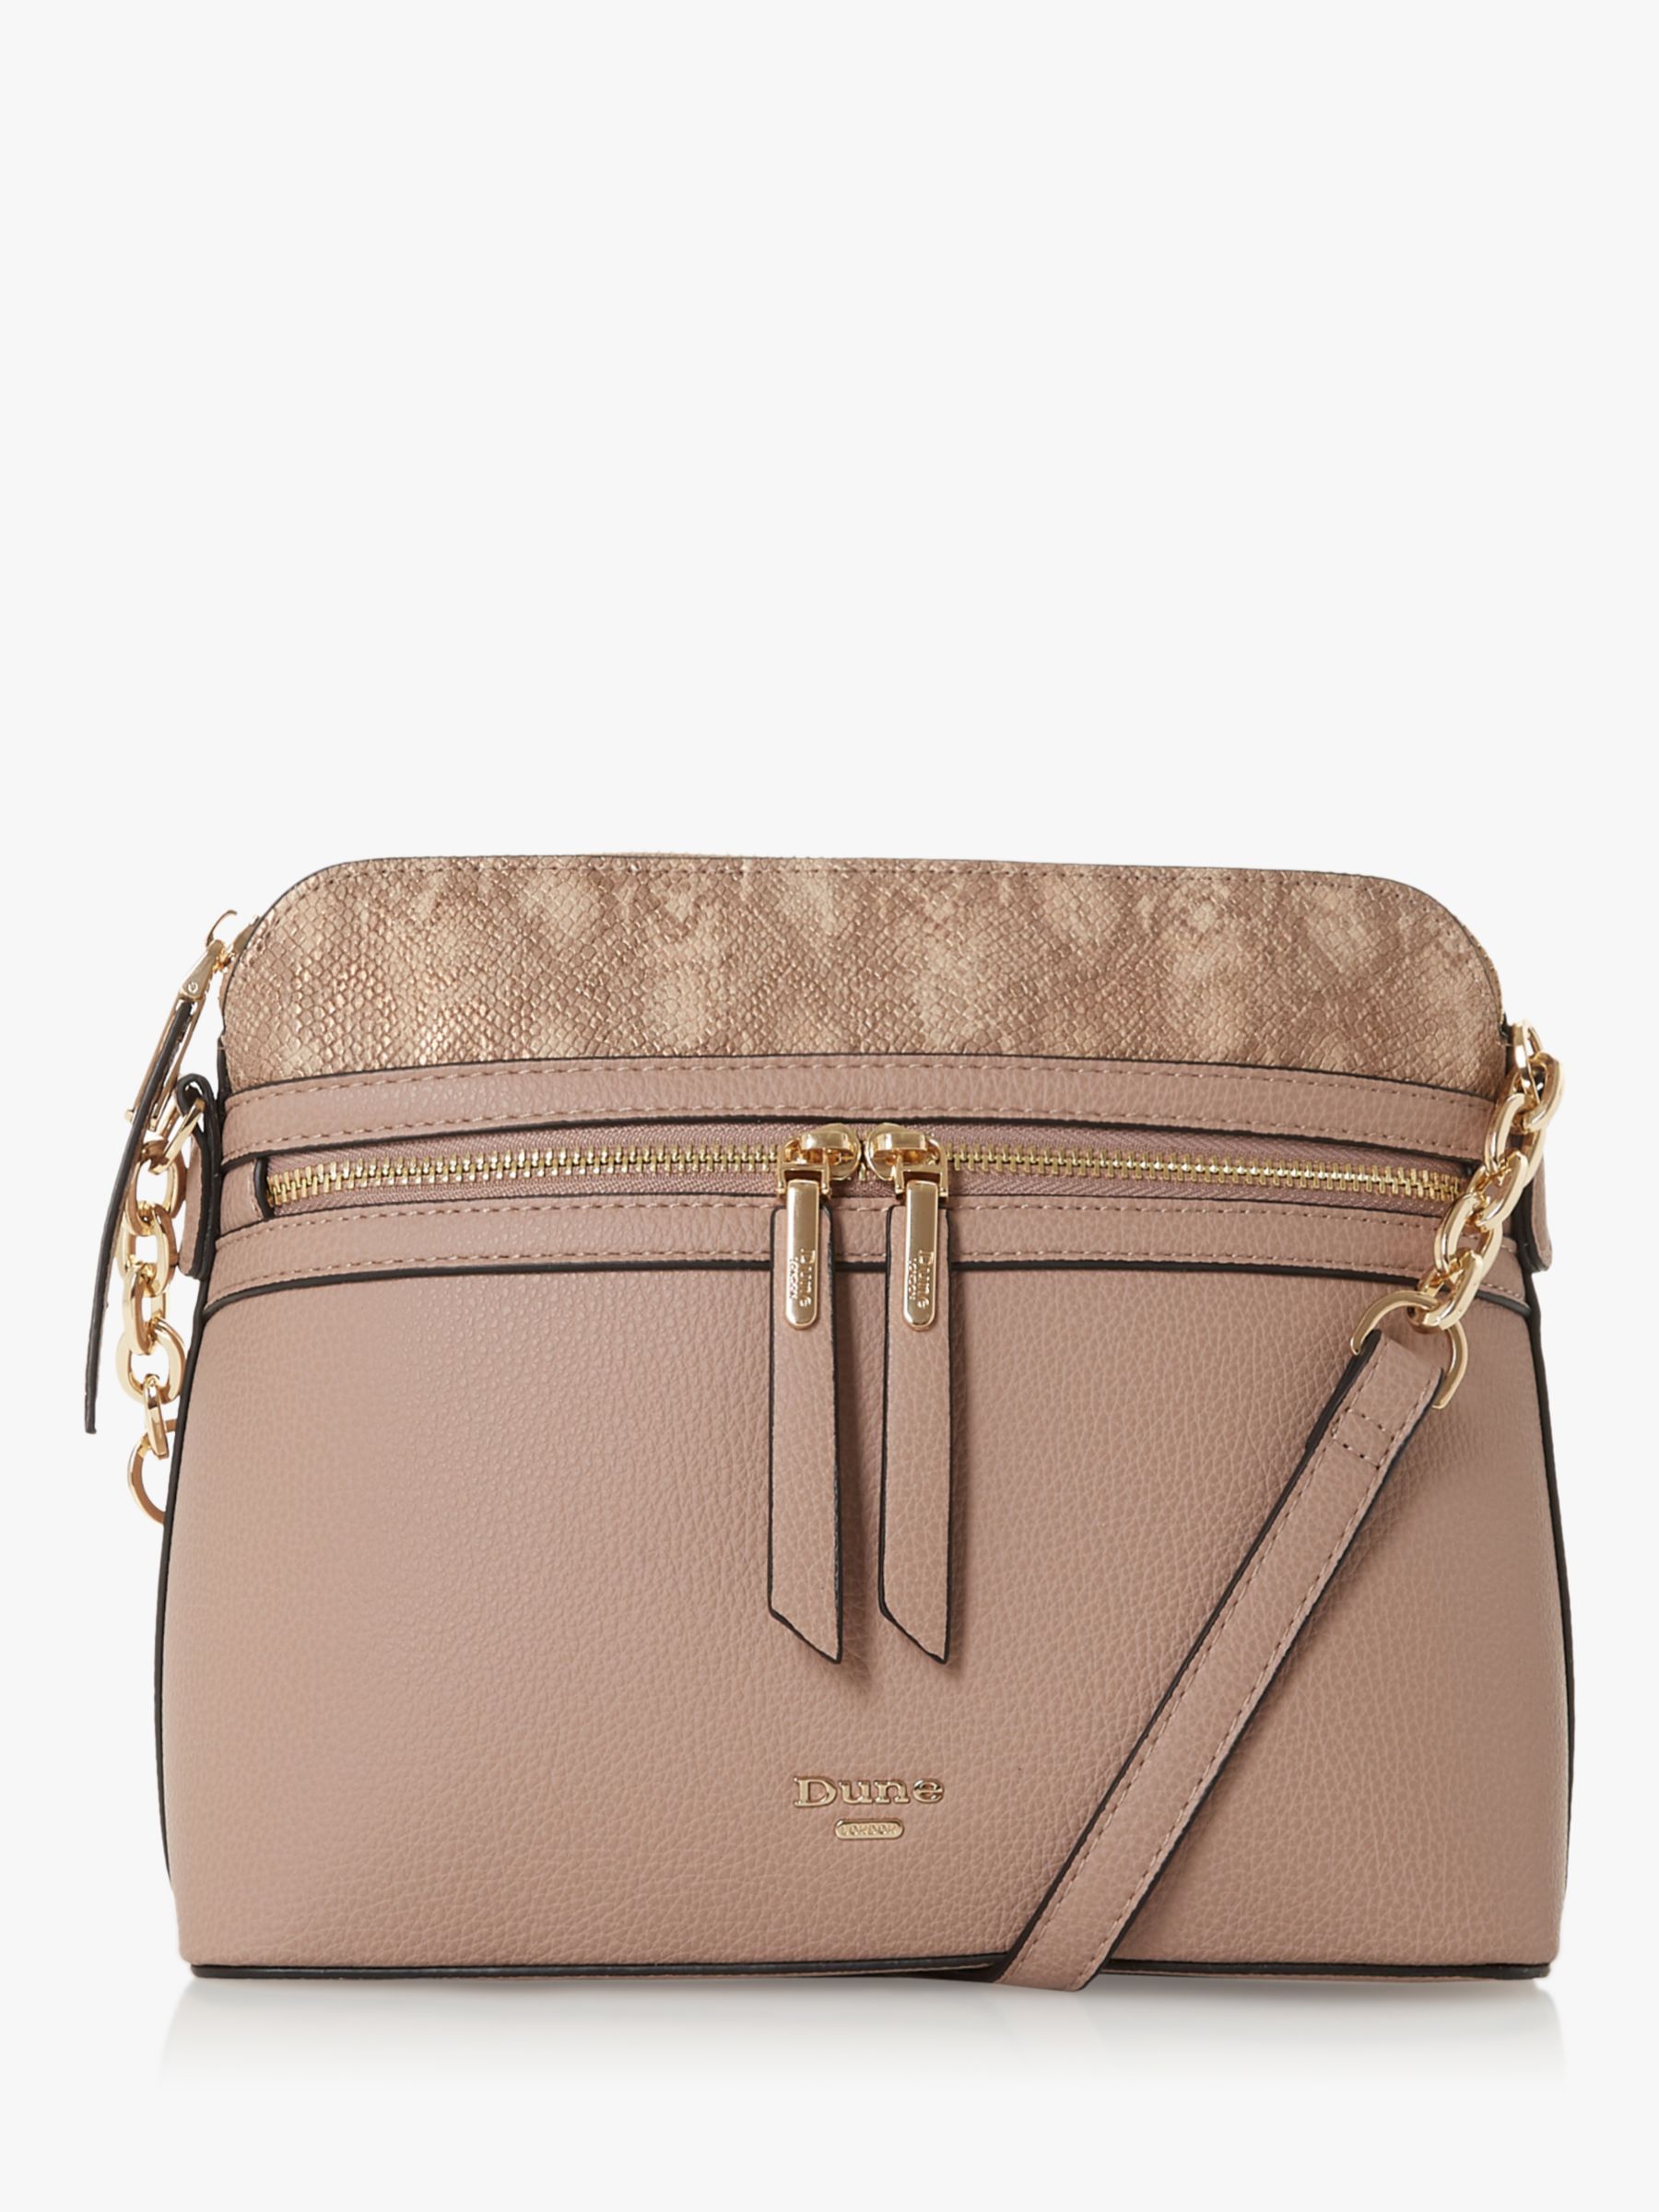 Dune Dolive Cross Body Bag, Cappuccino at John Lewis & Partners